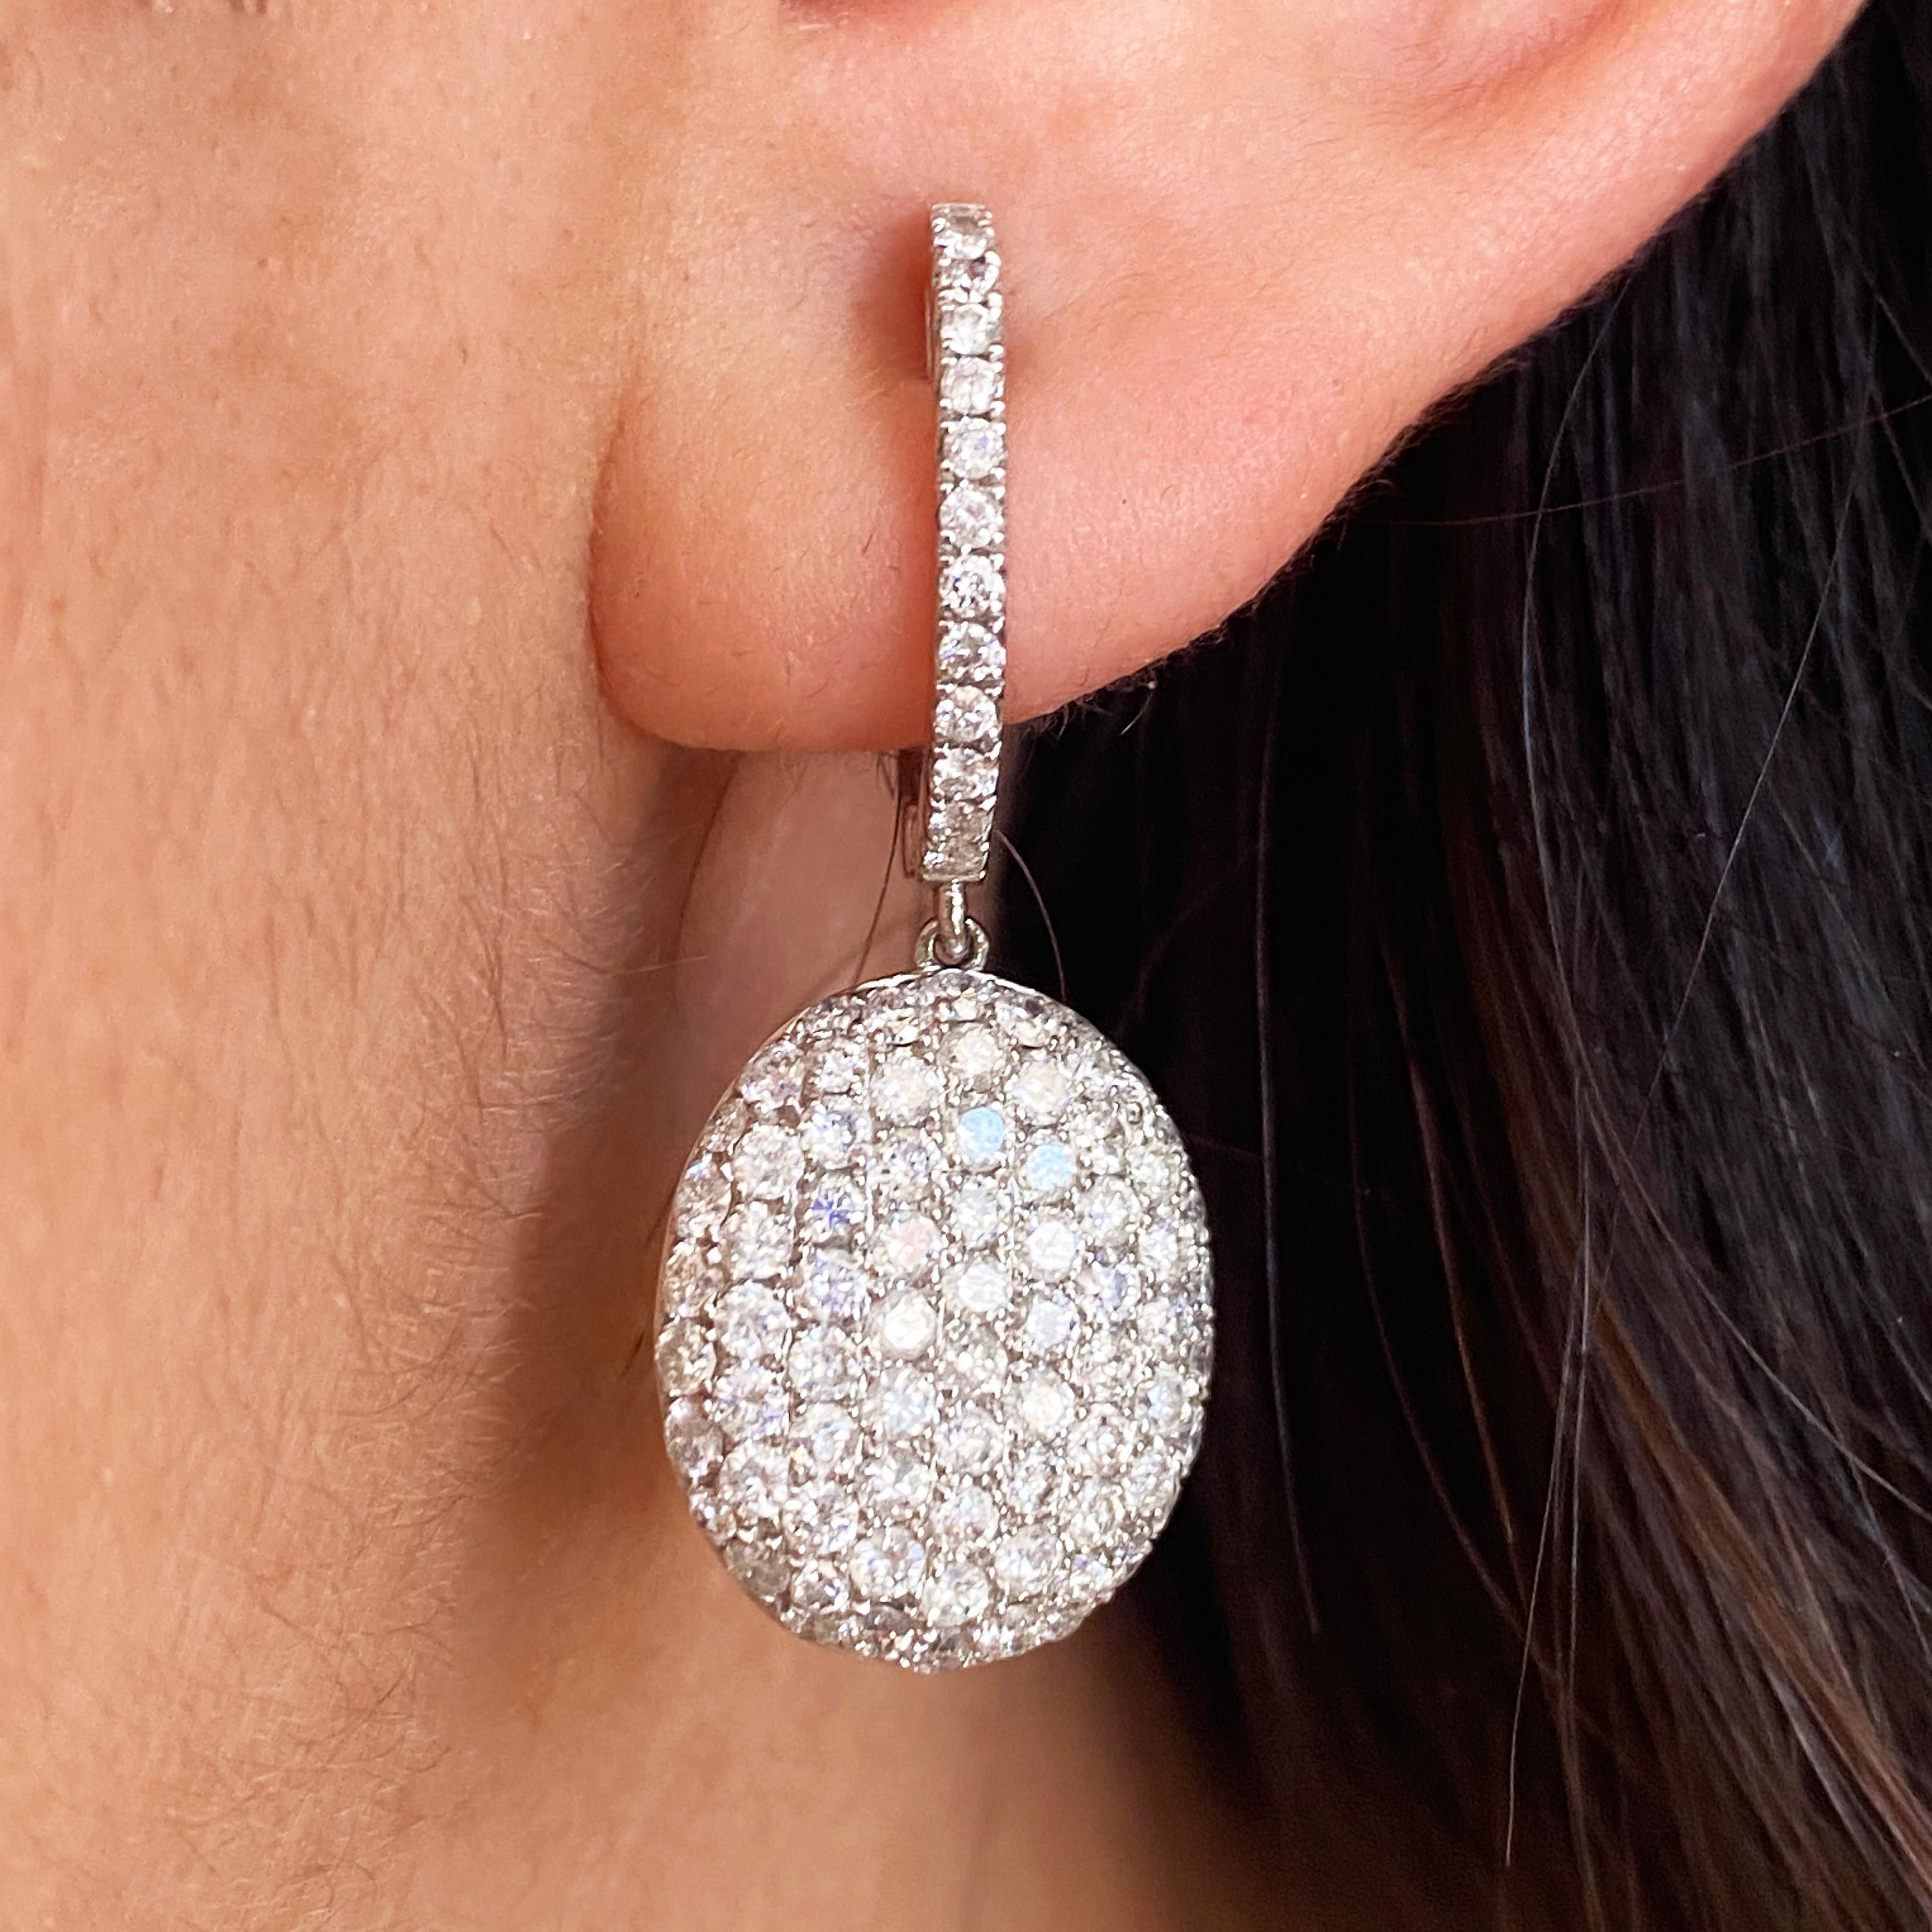 These oval earrings are a statement piece that will become fast favorites! Pair these lovelies with any outfit! The diamond-covered oval dangles dance and sway with your movements to add extra sass and sparkle! The carpet of pavé-set diamonds